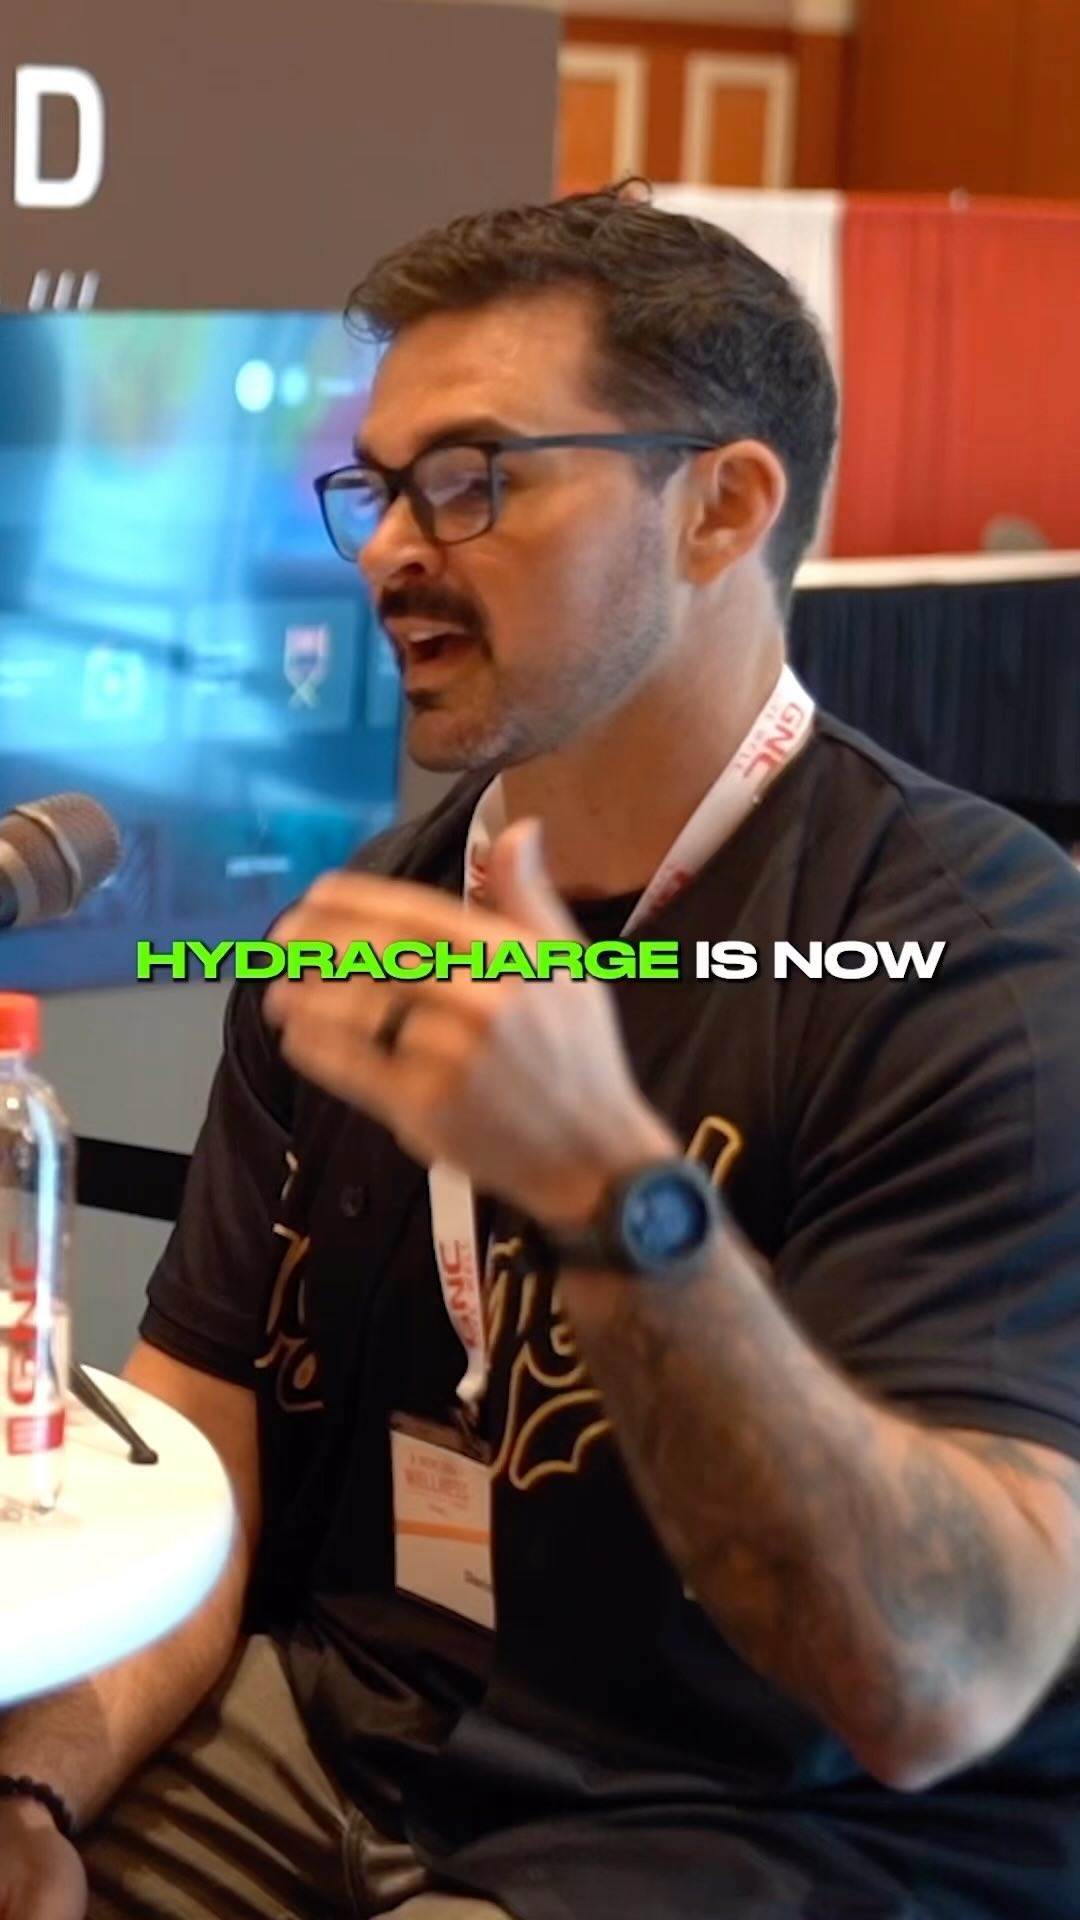 @kaged is changing hydracharge?? Well, kind of…